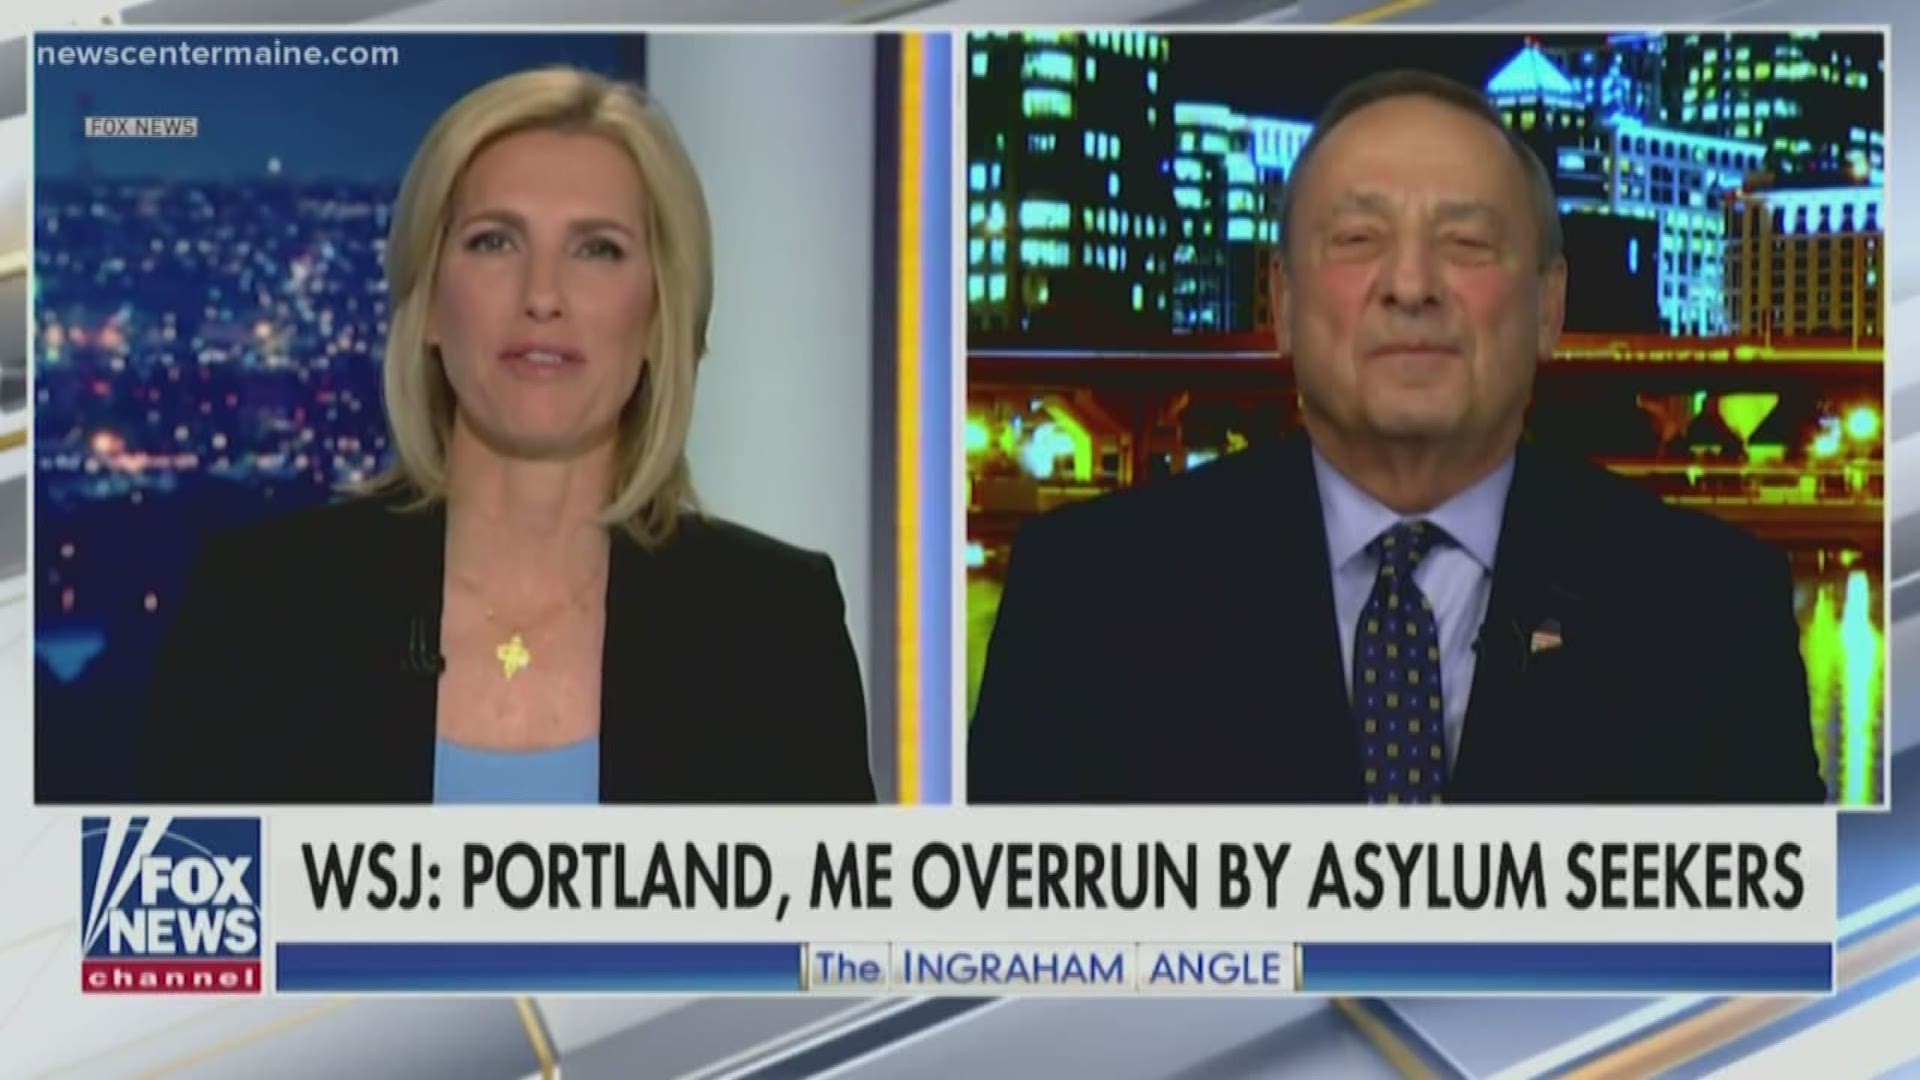 FOX News and former Governor Paul LePage made headlines over a controversial topic